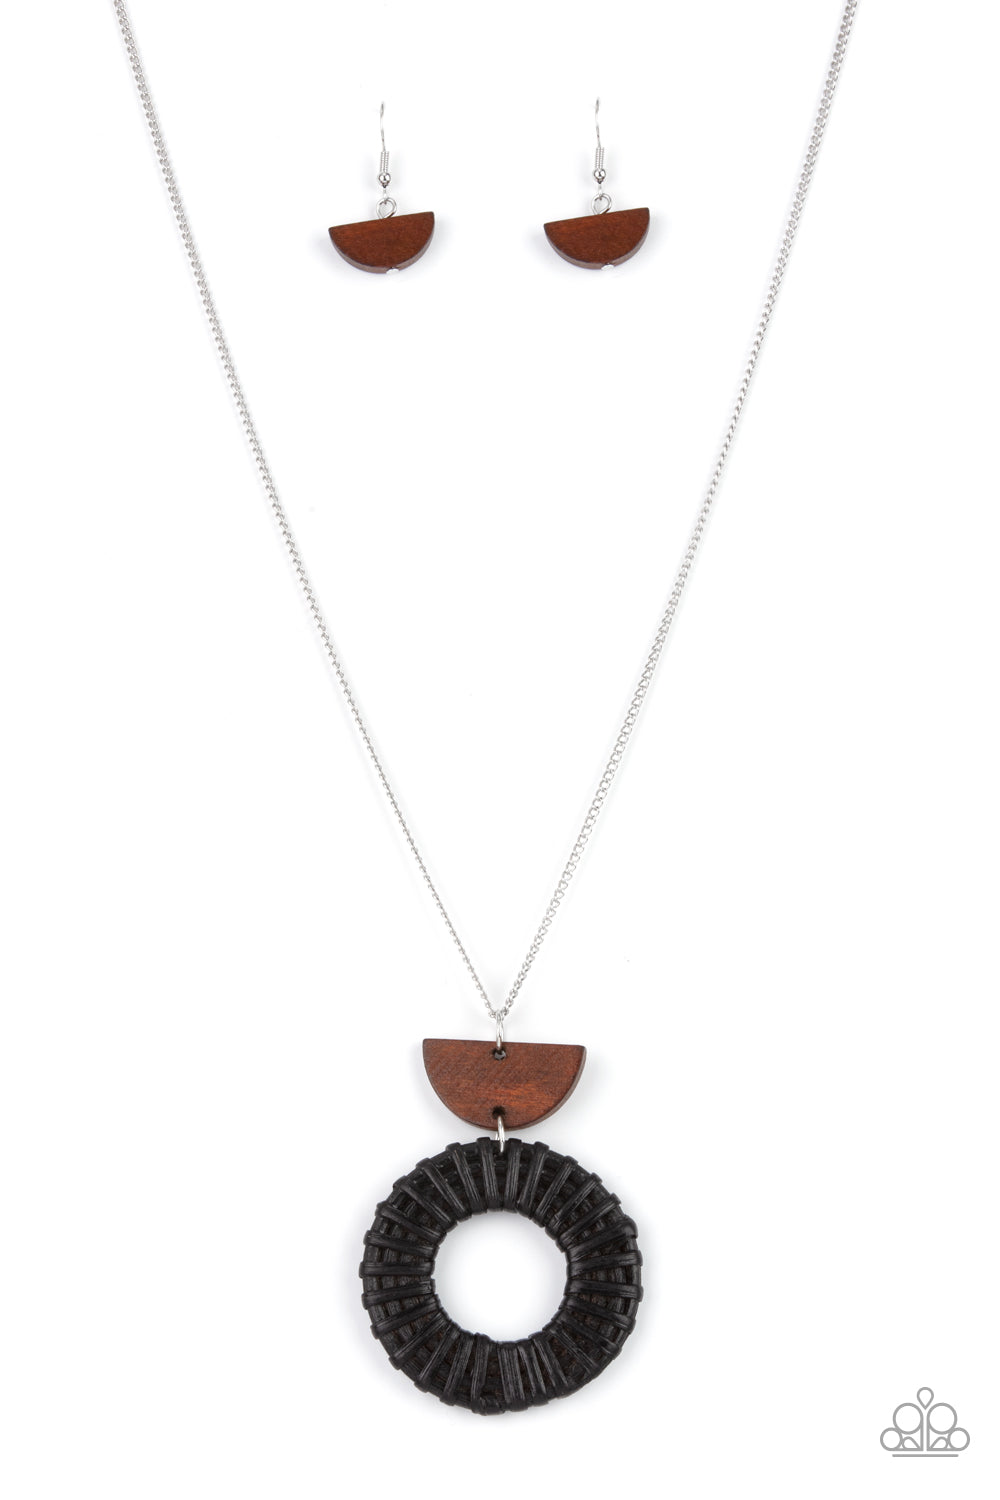 Homespun Stylist Black Necklace - Paparazzi Accessories  Black wicker-like cording wraps into a rustic hoop at the bottom of a half moon wooden frame. The earthy stacked pendants swing from a lengthened silver chain, creating an artisan inspired display. Features an adjustable clasp closure.  Sold as one individual necklace. Includes one pair of matching earrings.